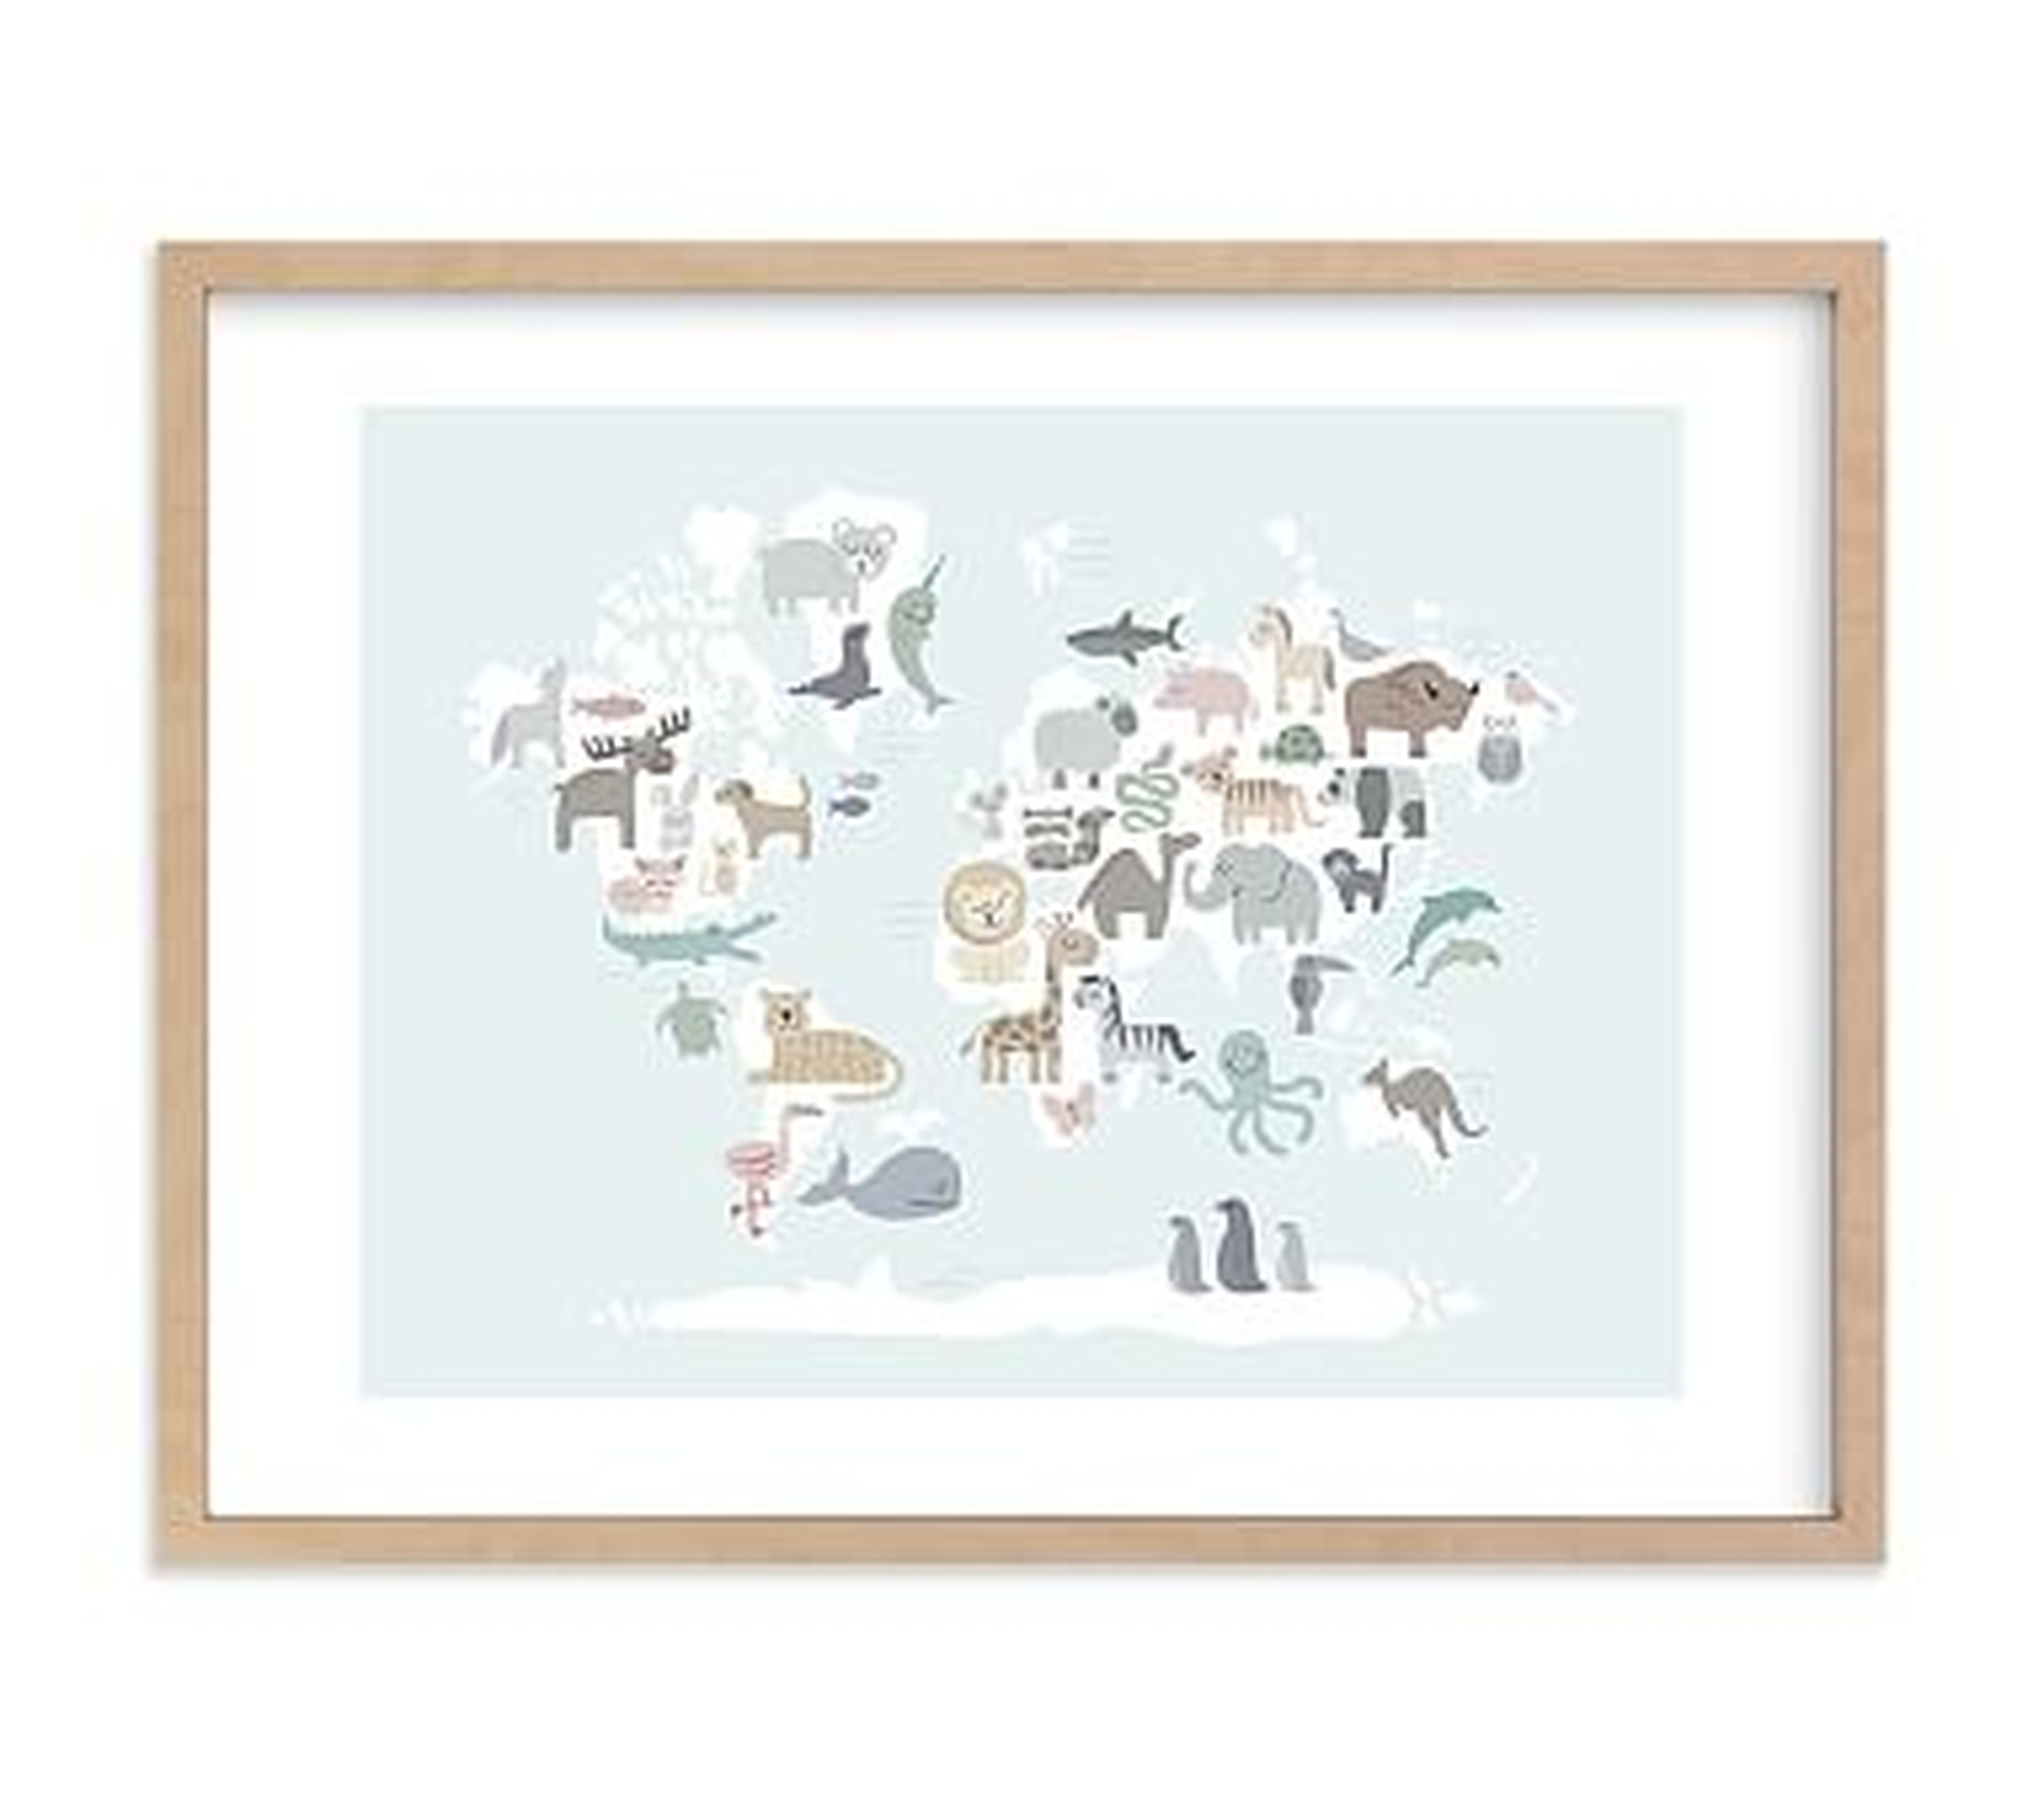 Minted(R) Wild World Map Wall Art by Jessie Steury; 24x18, Natural - Pottery Barn Kids